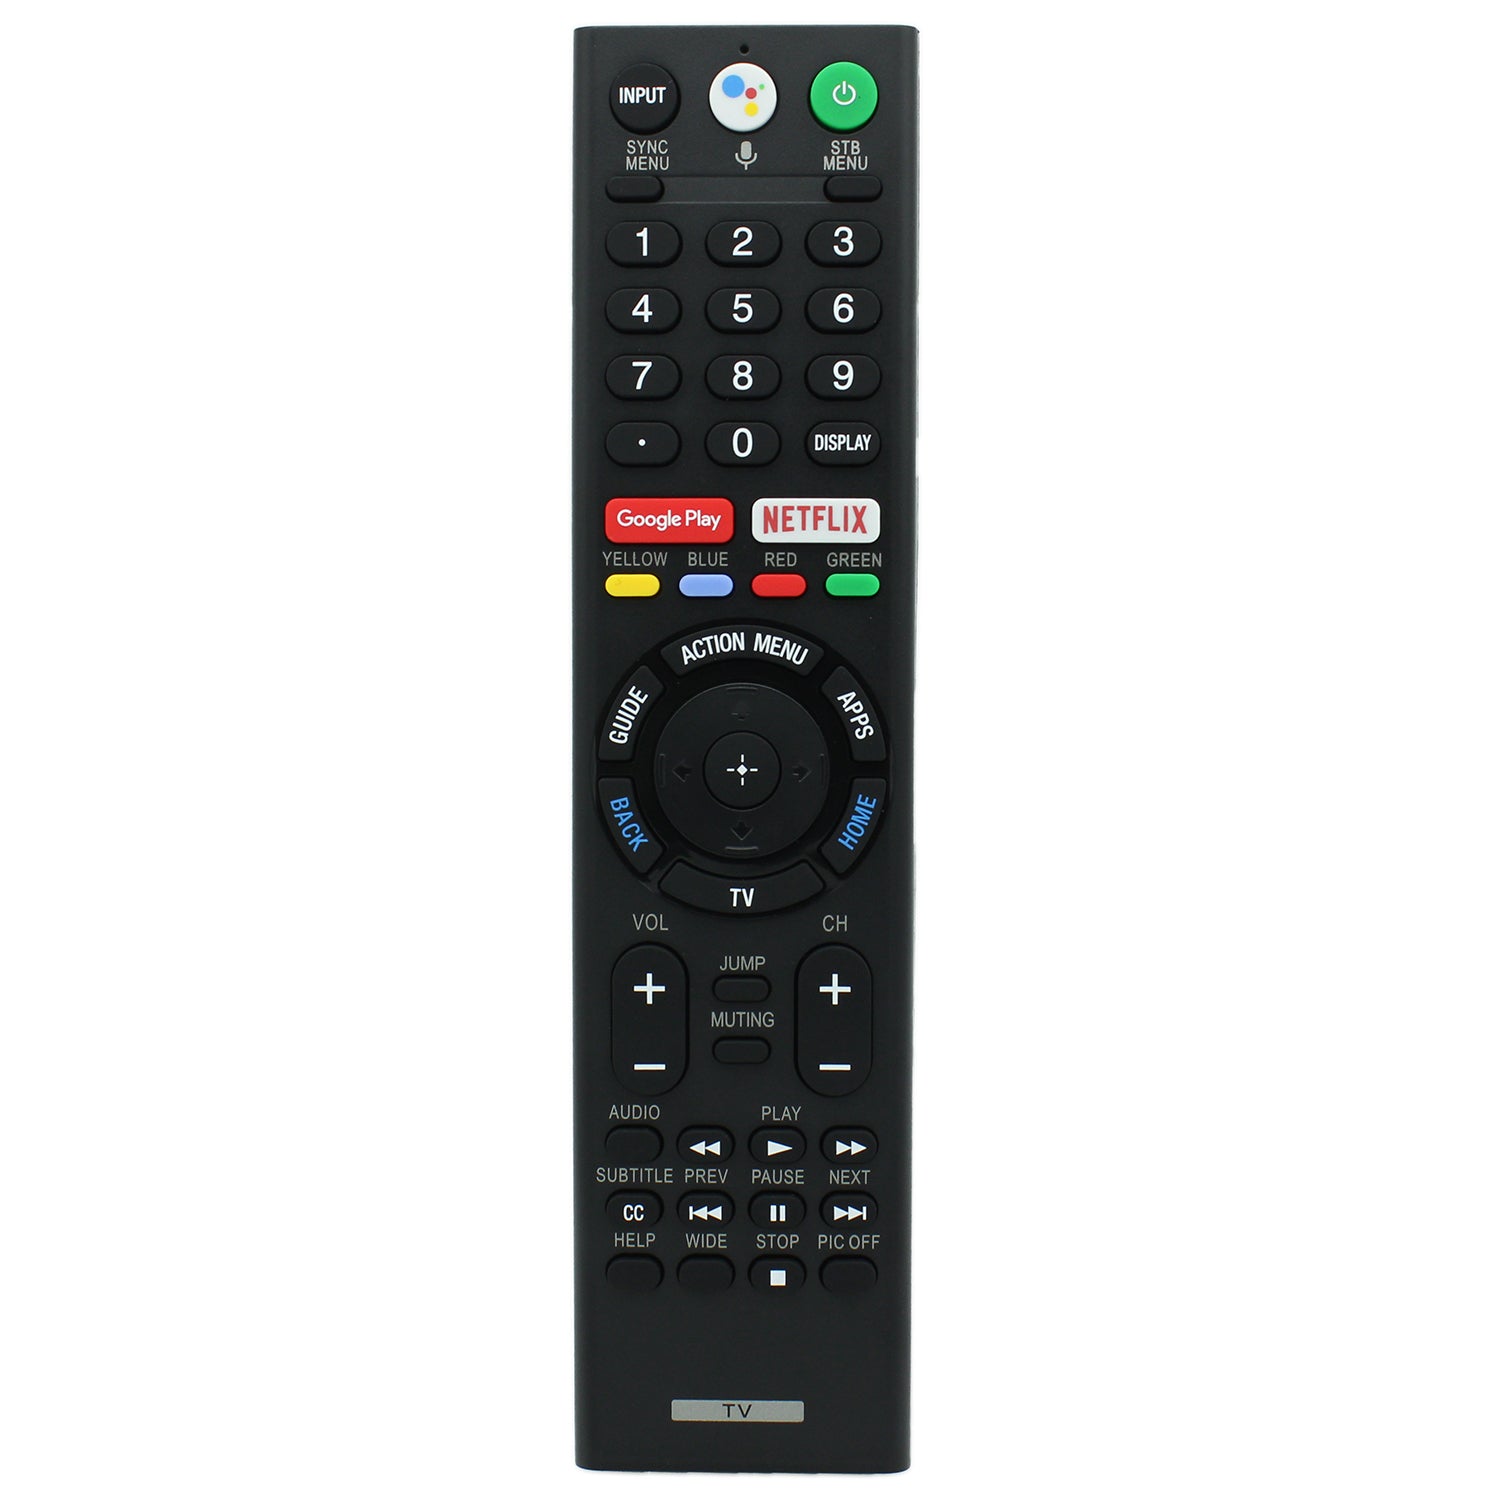 RMF-TX310P Voice Remote Replacement for Sony TV KD-55A8G KD-65A8G KD-75X8000G KD-65X8000G